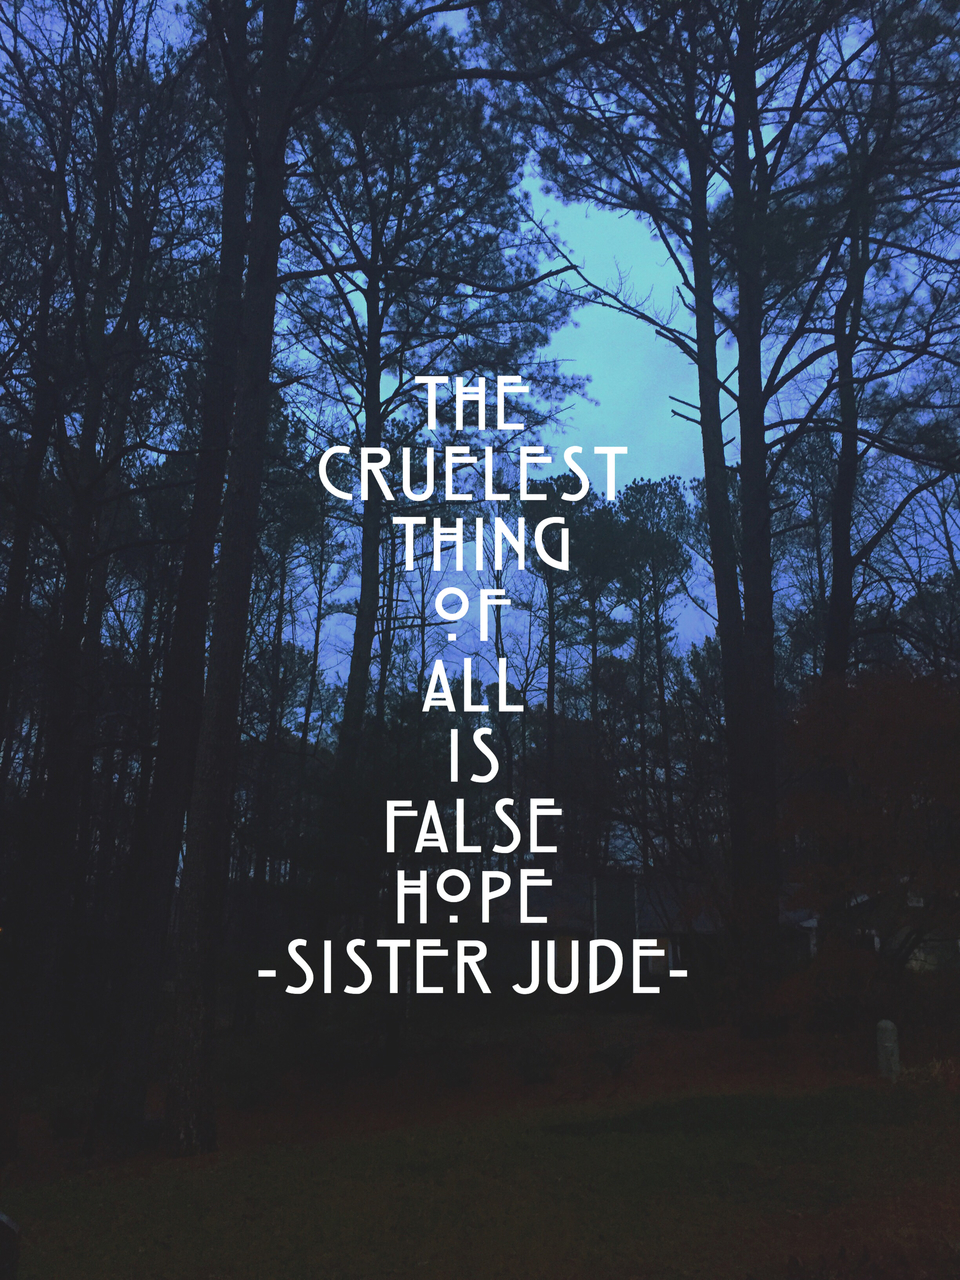 American Horror Story, Ahs, And Quotes Image Horror Story S2 Quotes